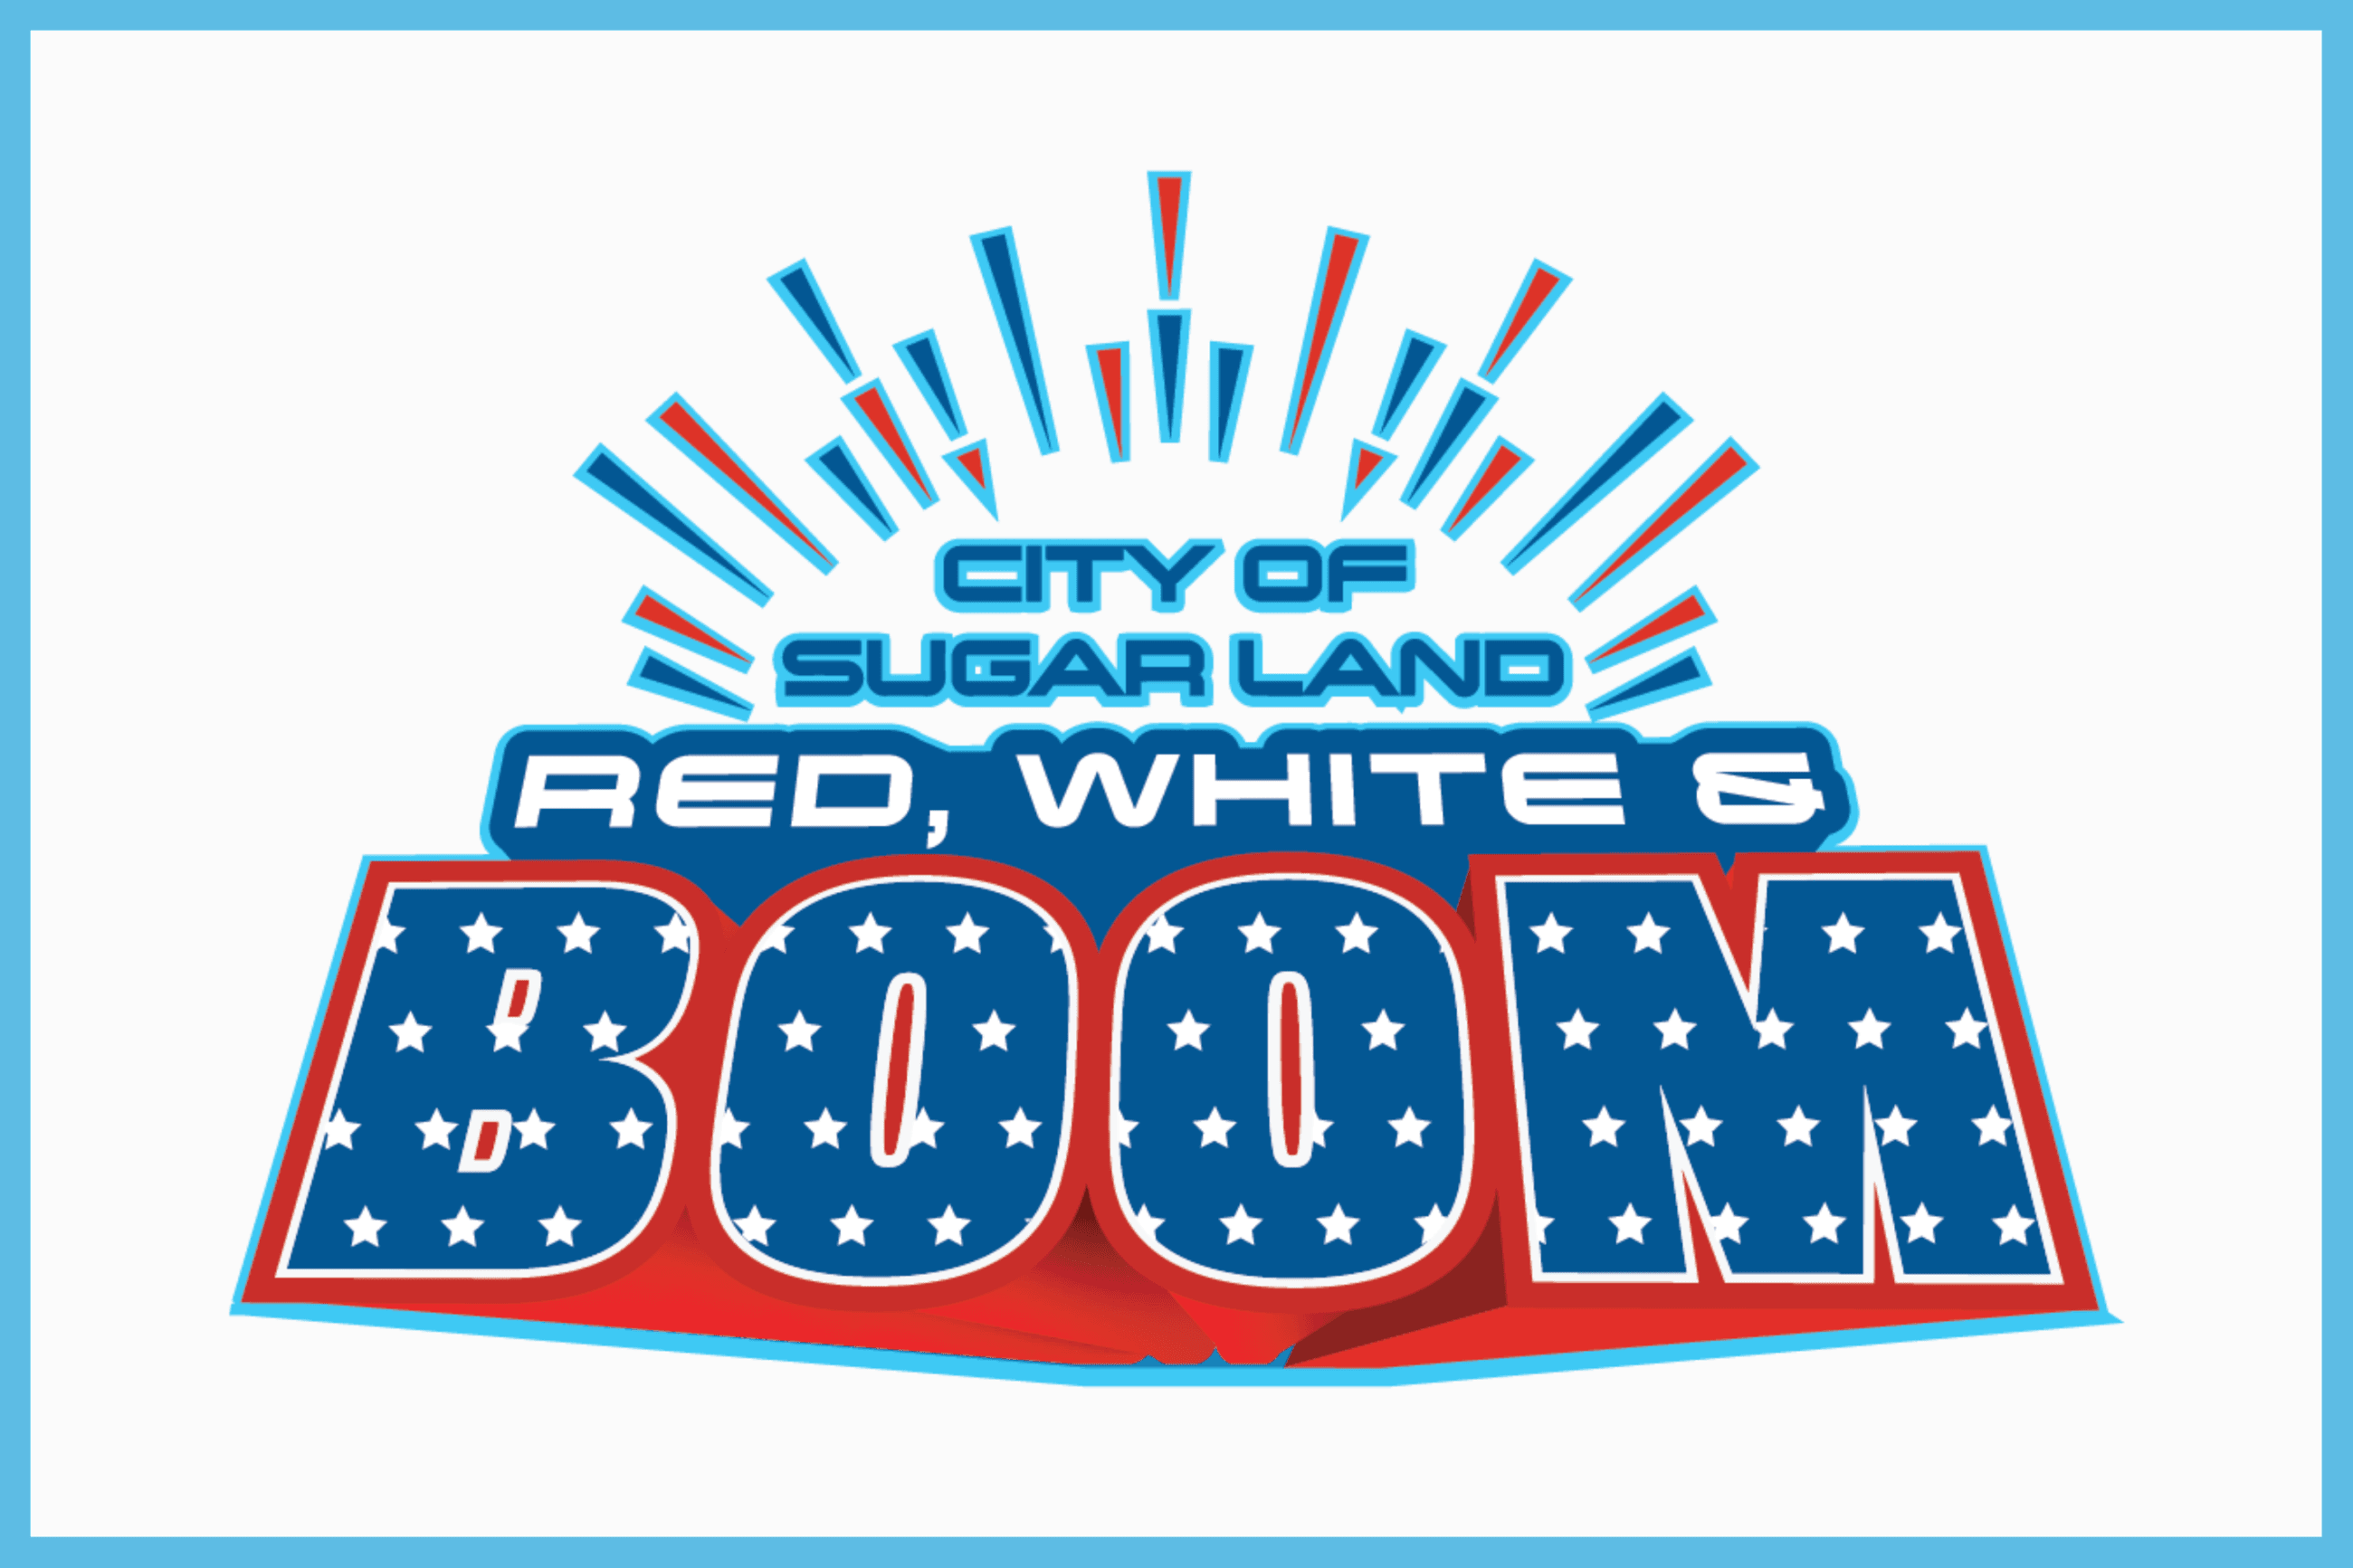 CITY OF SUGAR LAND’S Red, White and Boom